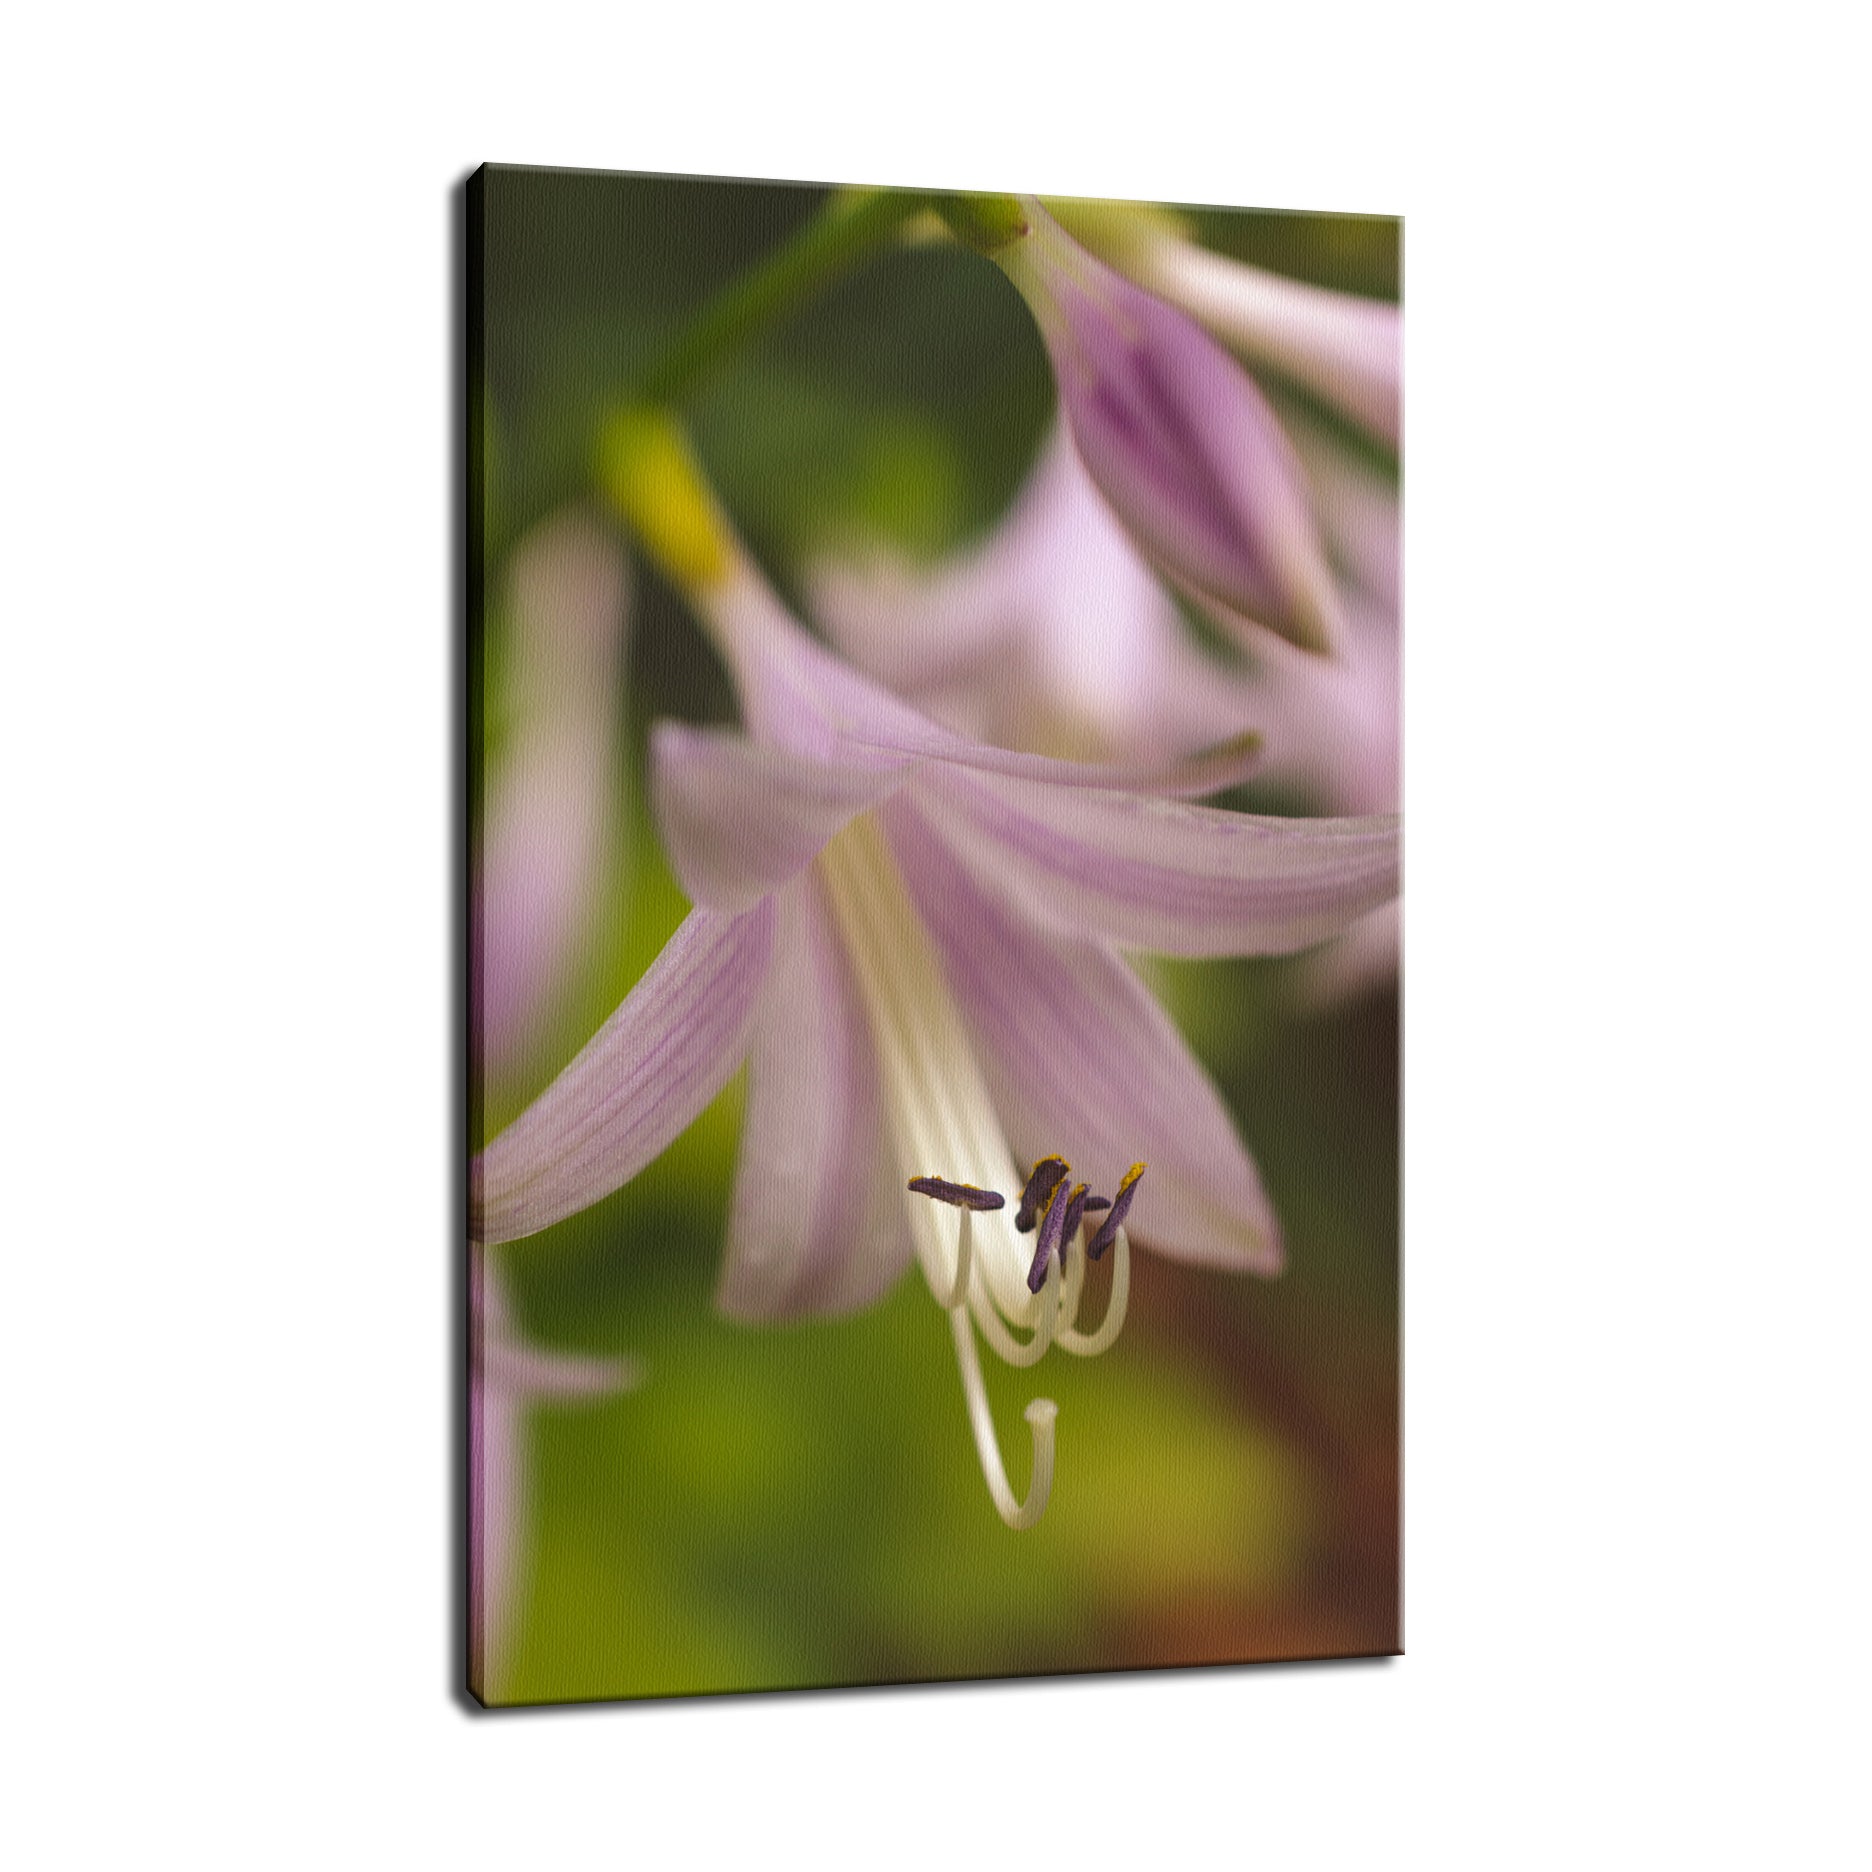 Close-up Hosta Bloom Nature / Floral Photo Fine Art Canvas Wall Art Prints  - PIPAFINEART